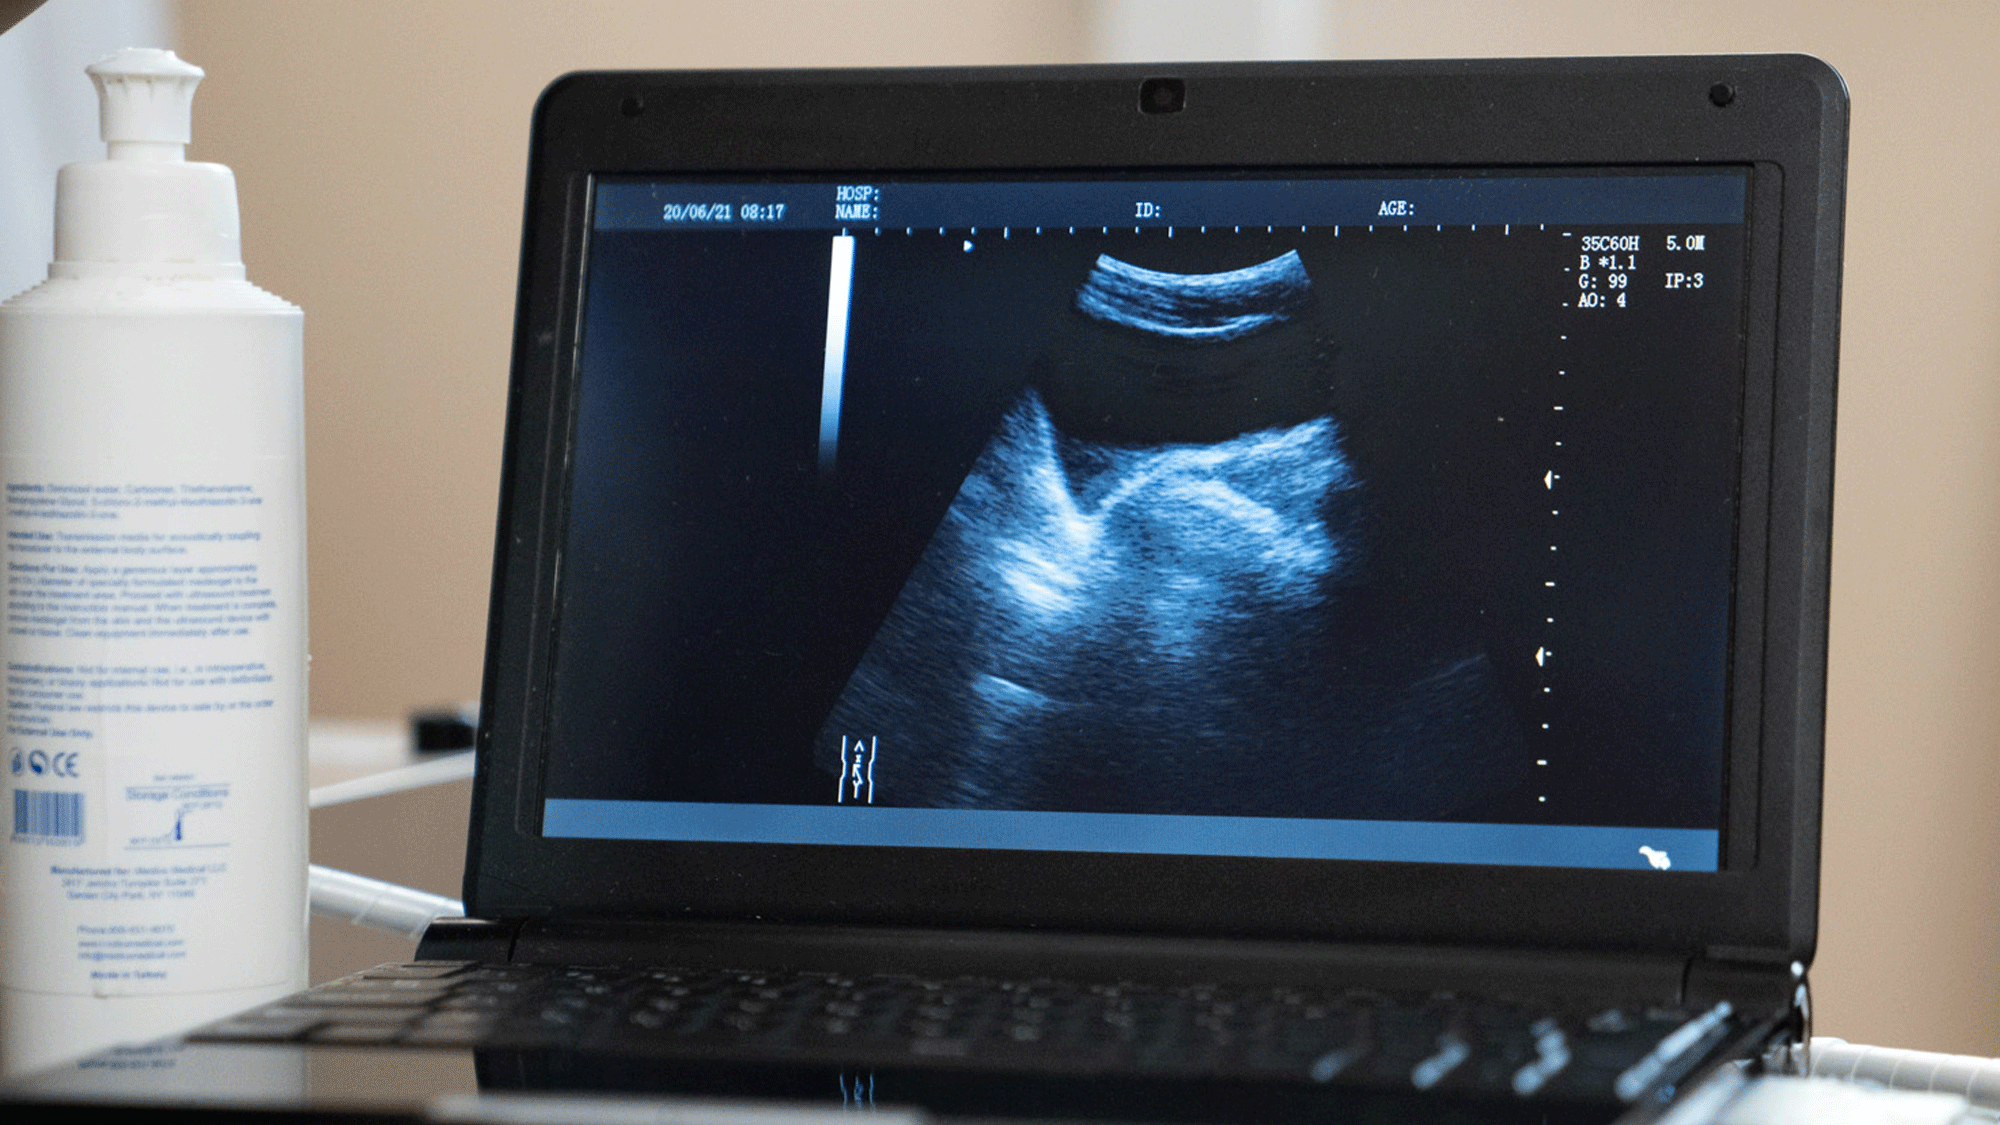 Ultrasound Anal Sex - Here's What An Ultrasound Of Someone Getting Butt Fucked Looks Like -  TheSword.com